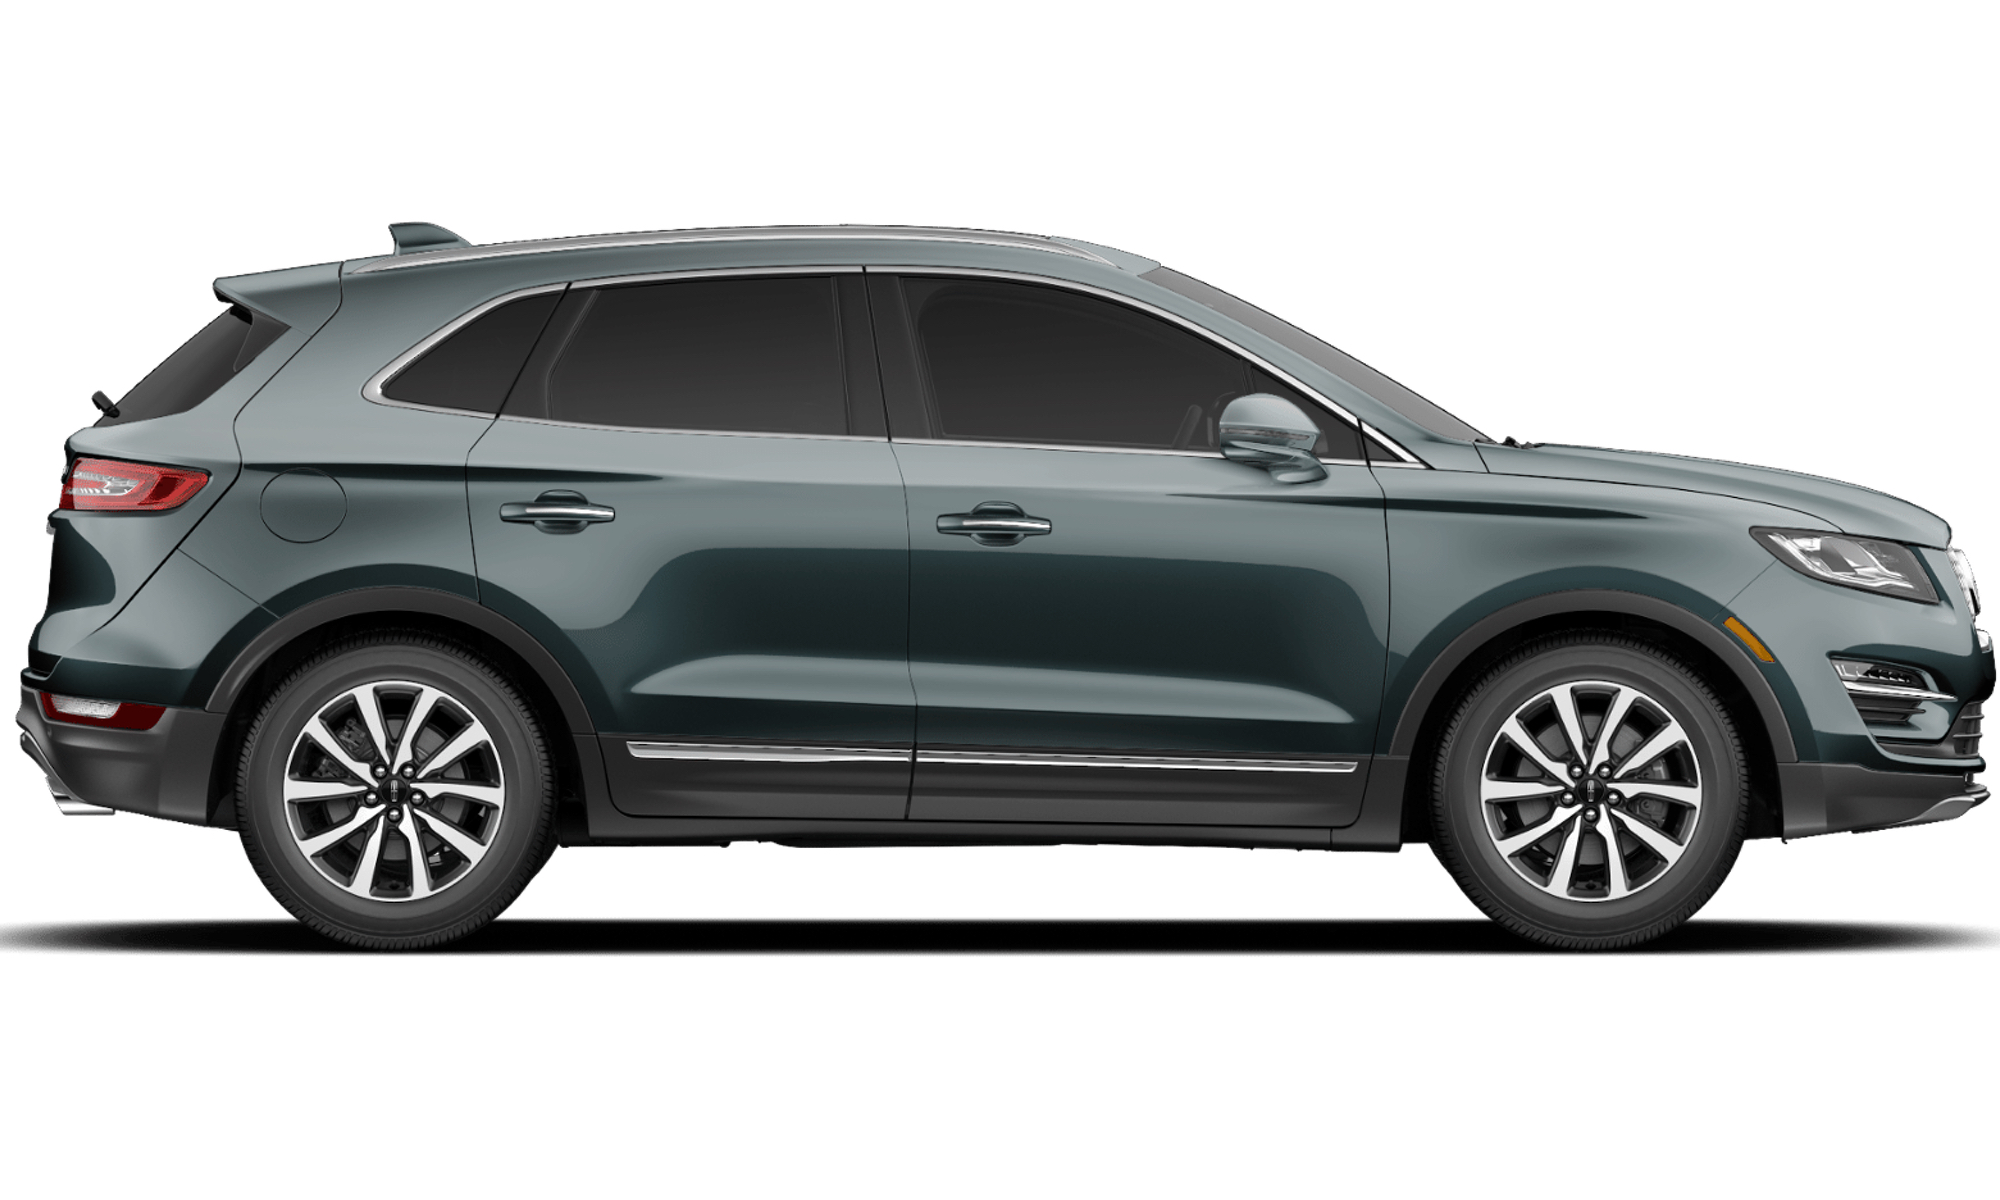 New Baltic Sea Green Color For 2019 Lincoln Mkc First Look